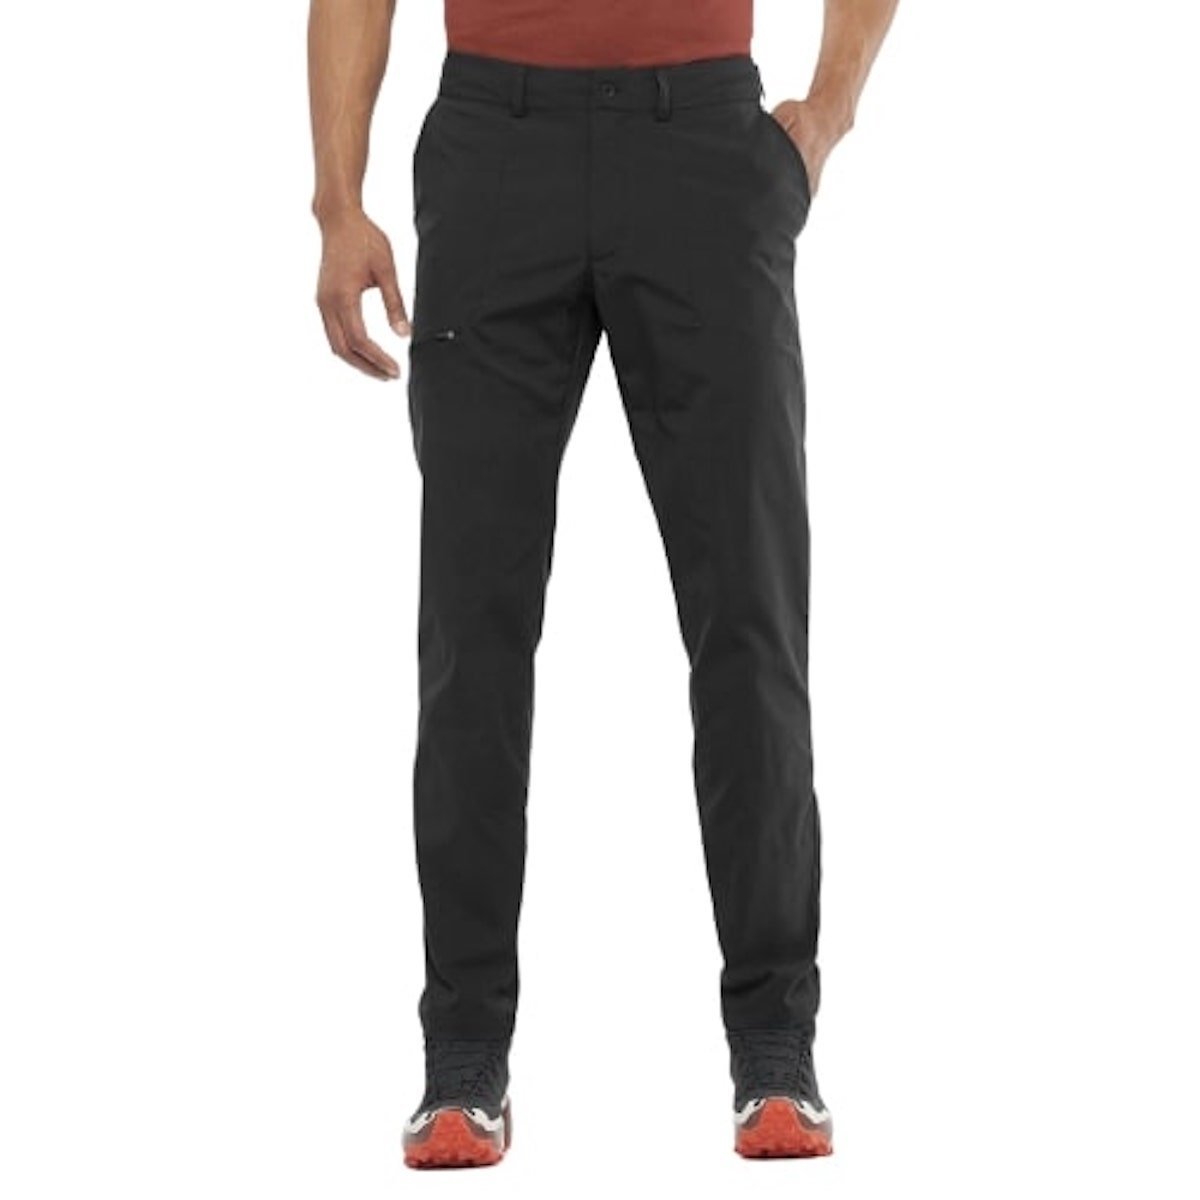 LC1879600_0_MOD_outrackcitypant_deepblack_outdoor_m.png.cq5dam.web.1200.1200-removebg-preview